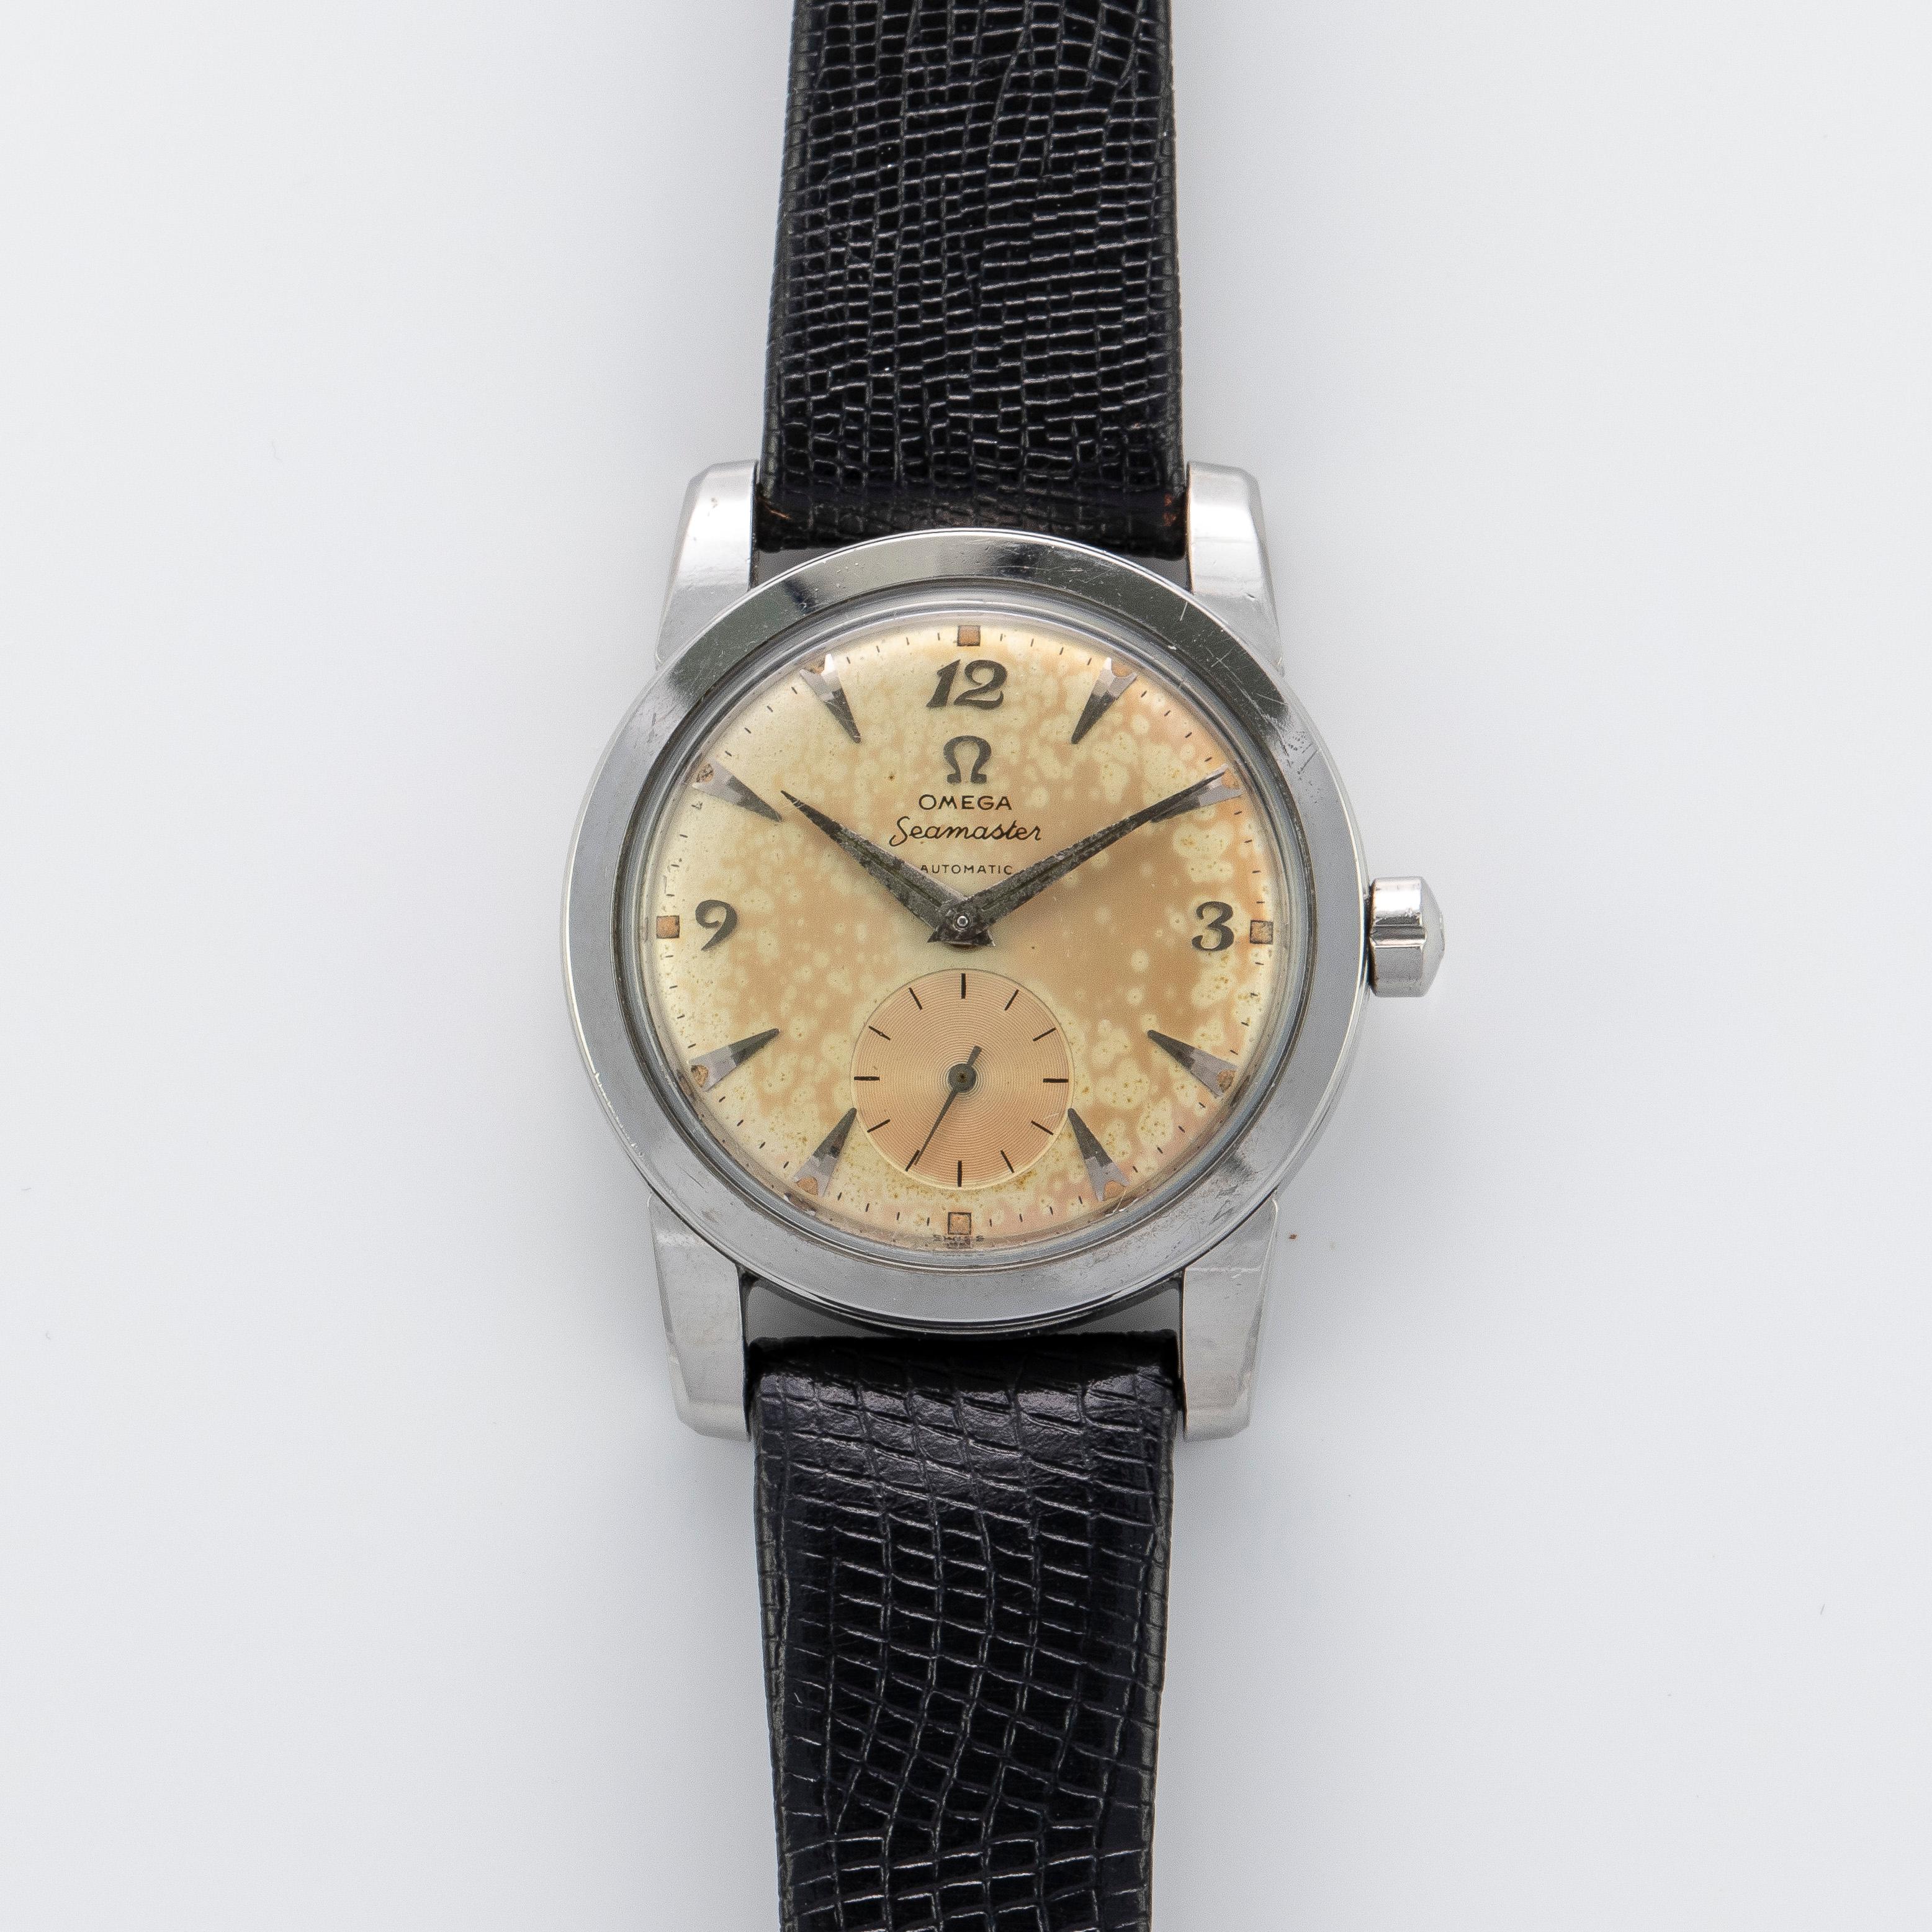 Stainless Steel Omega Seamaster Automatic Watch, 1950s
Tropical Dial with Applied Arabic and Dagger Hour Markers and Sub Second Dial at Six O'Clock
Stainless Steel Bezel
Stainless Steel Case
34mm in size 
Features Omega Automatic Bumper Movement